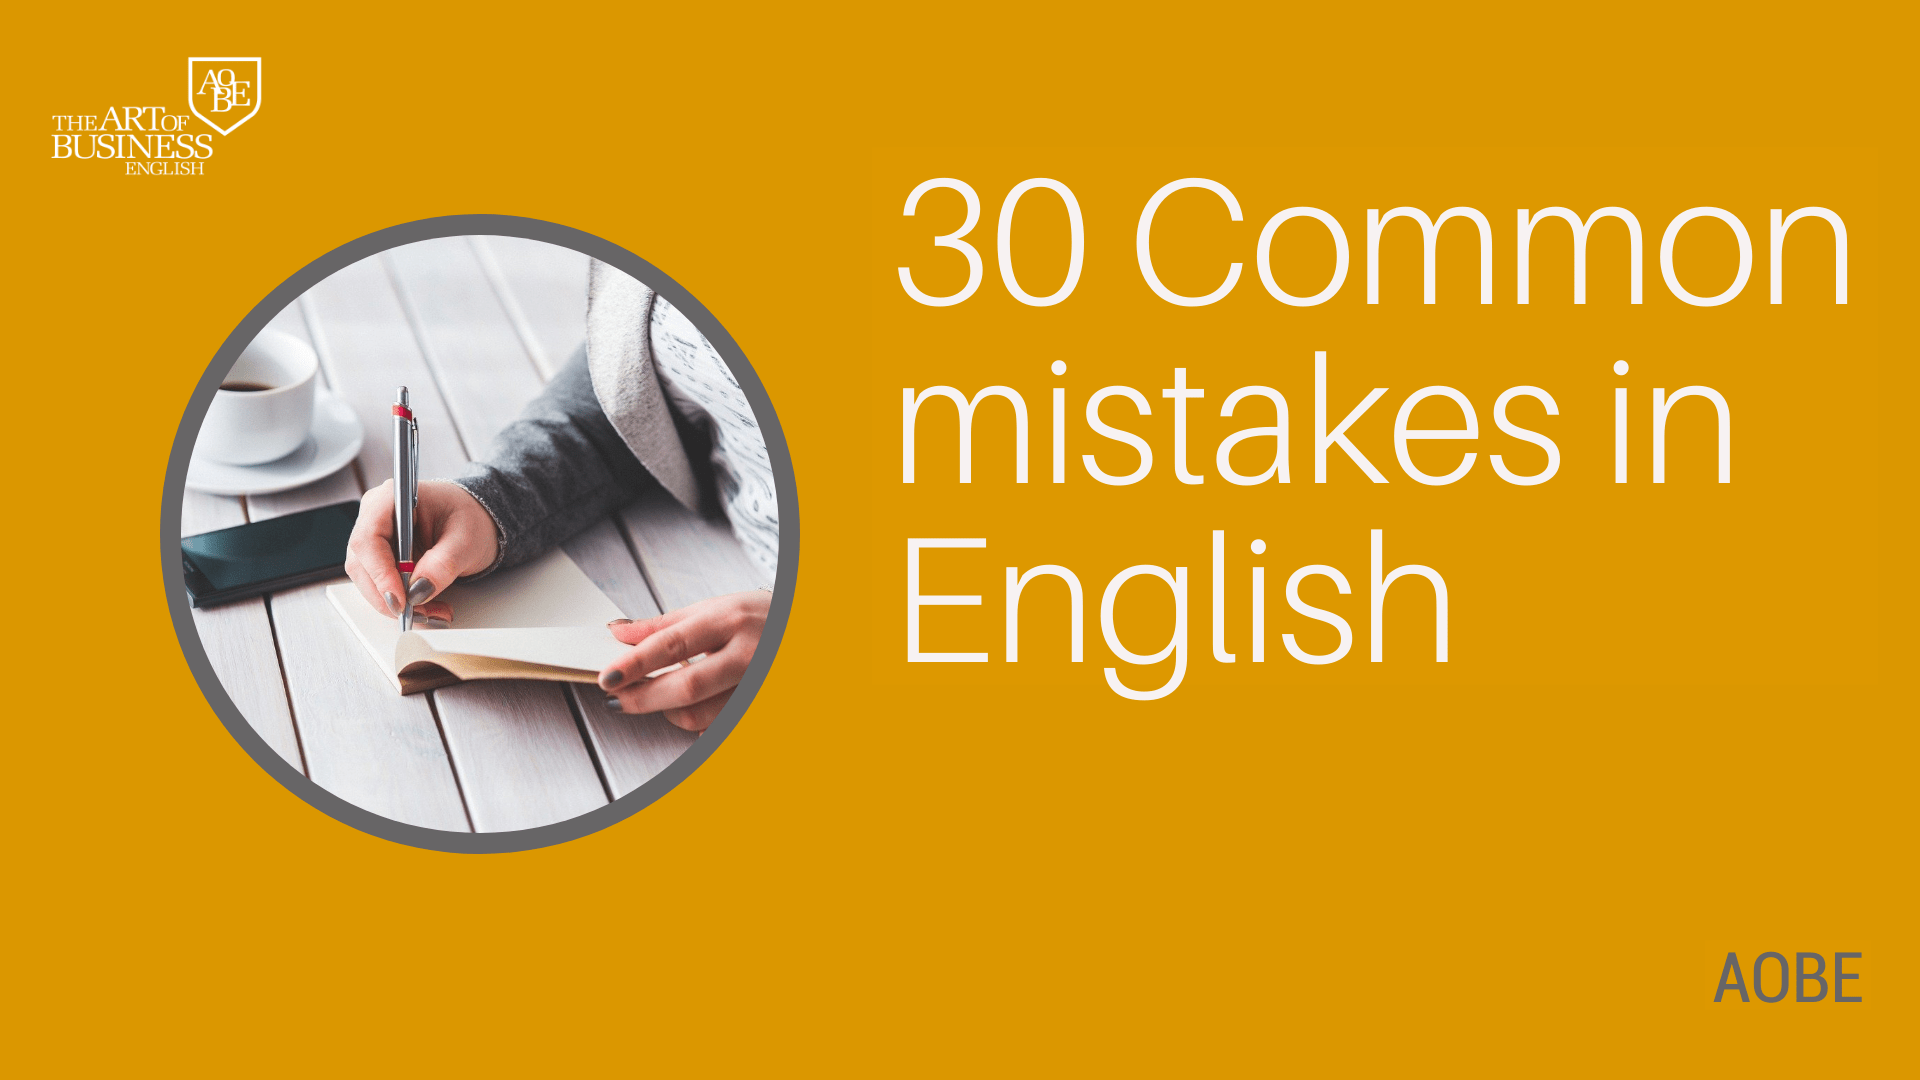 30 common mistakes in English